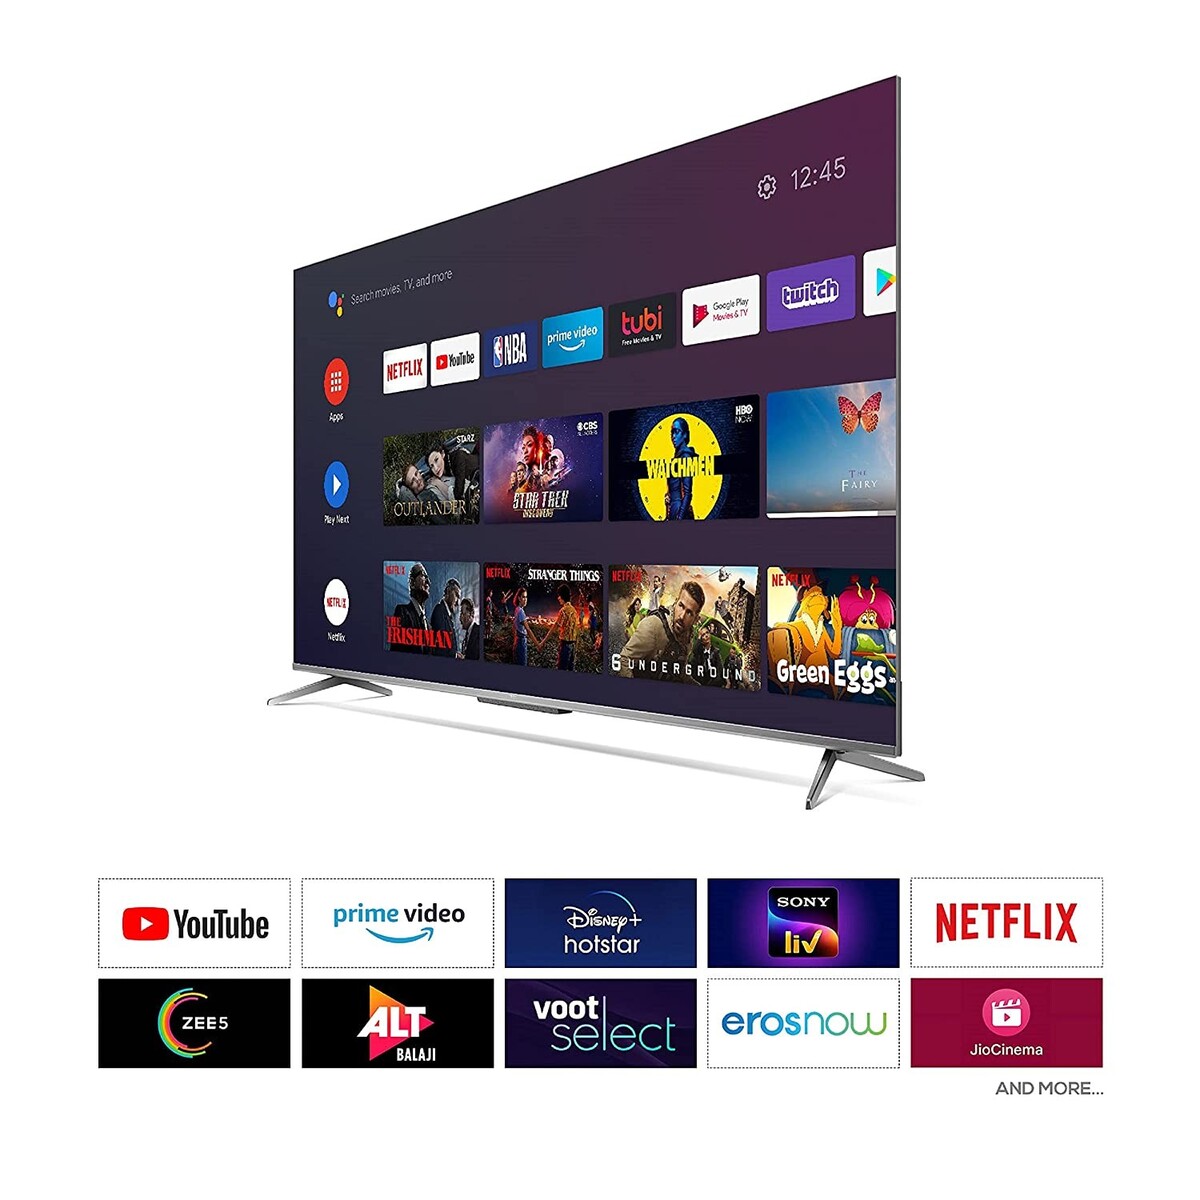 TCL 4K Ultra HD Android Smart LED TV 55P715 55"